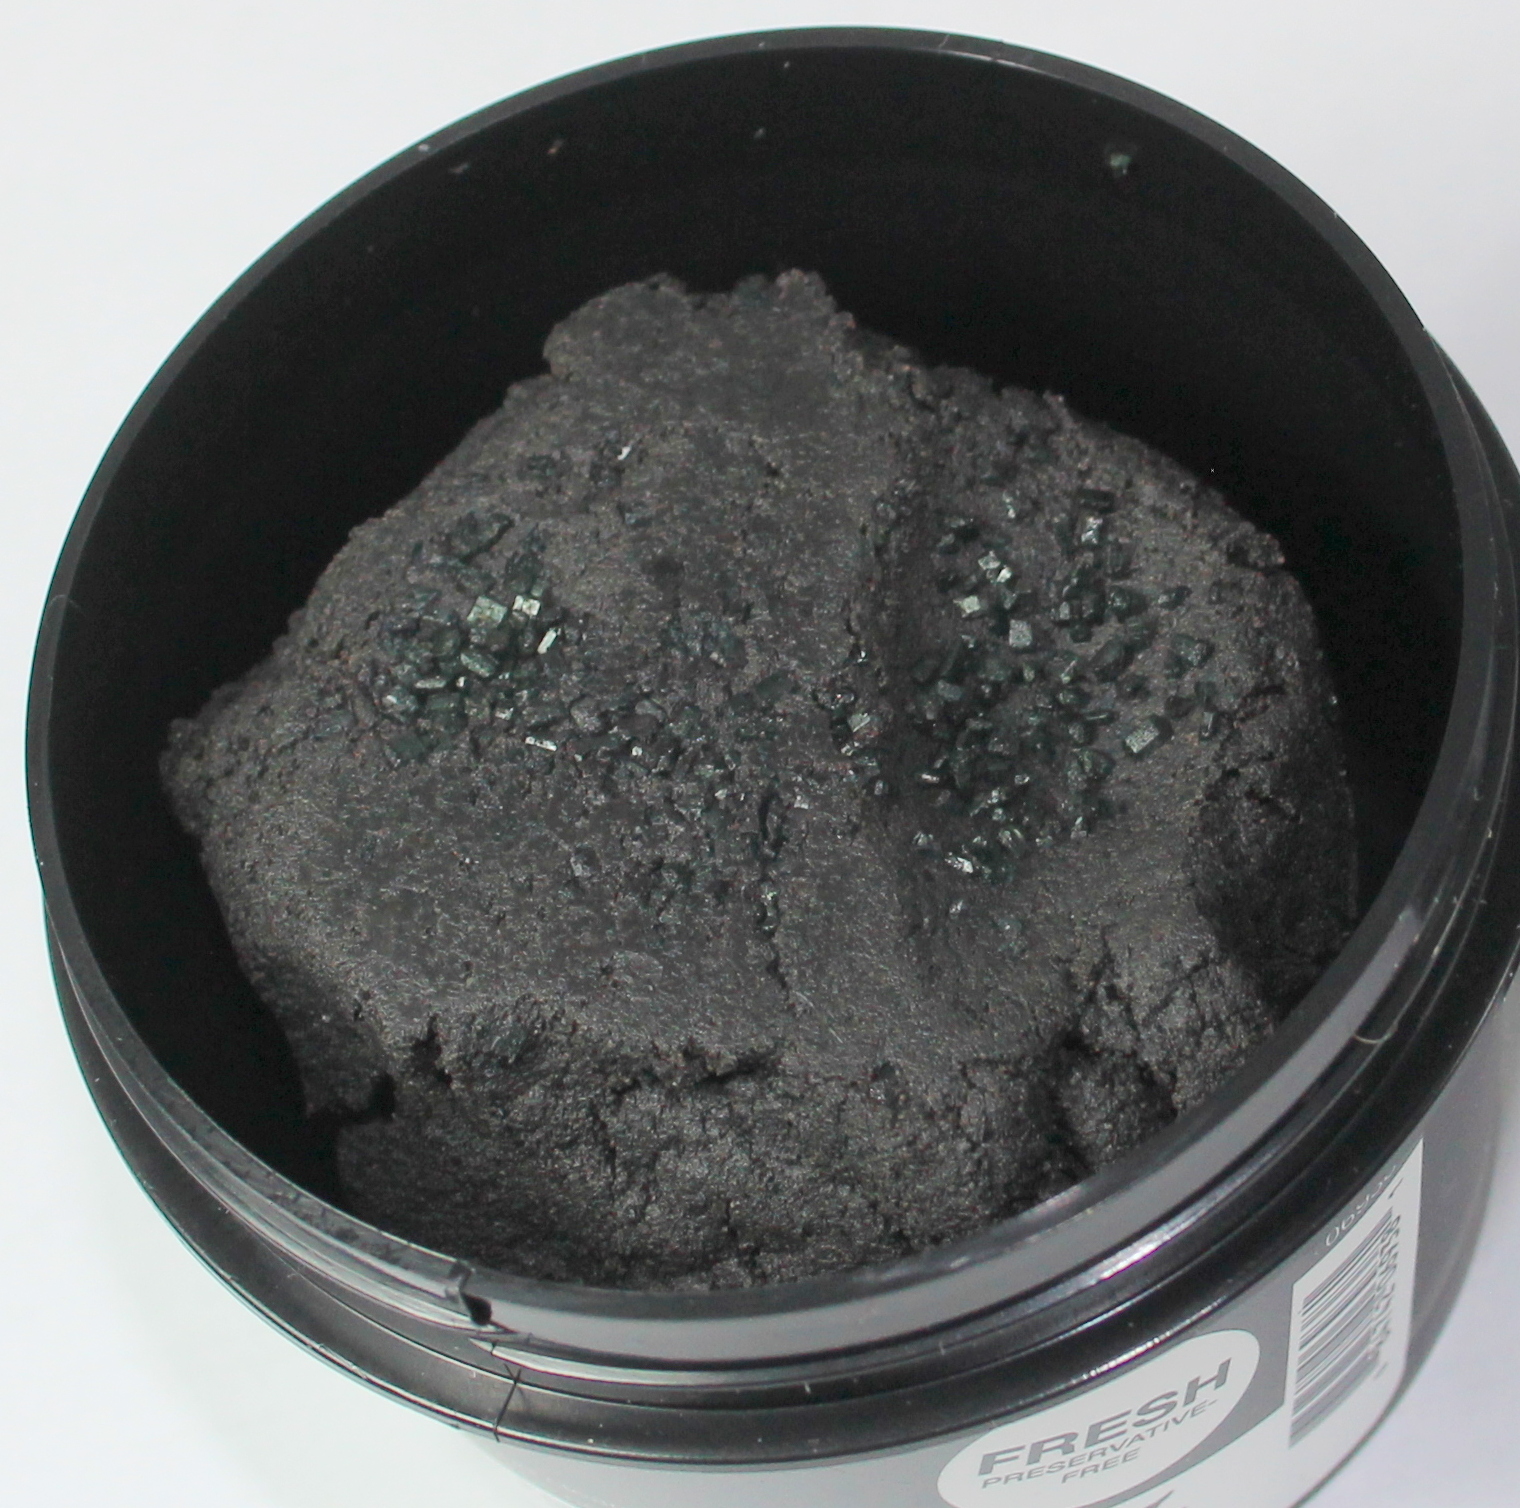 Lush Dark Angels Cleanser Review